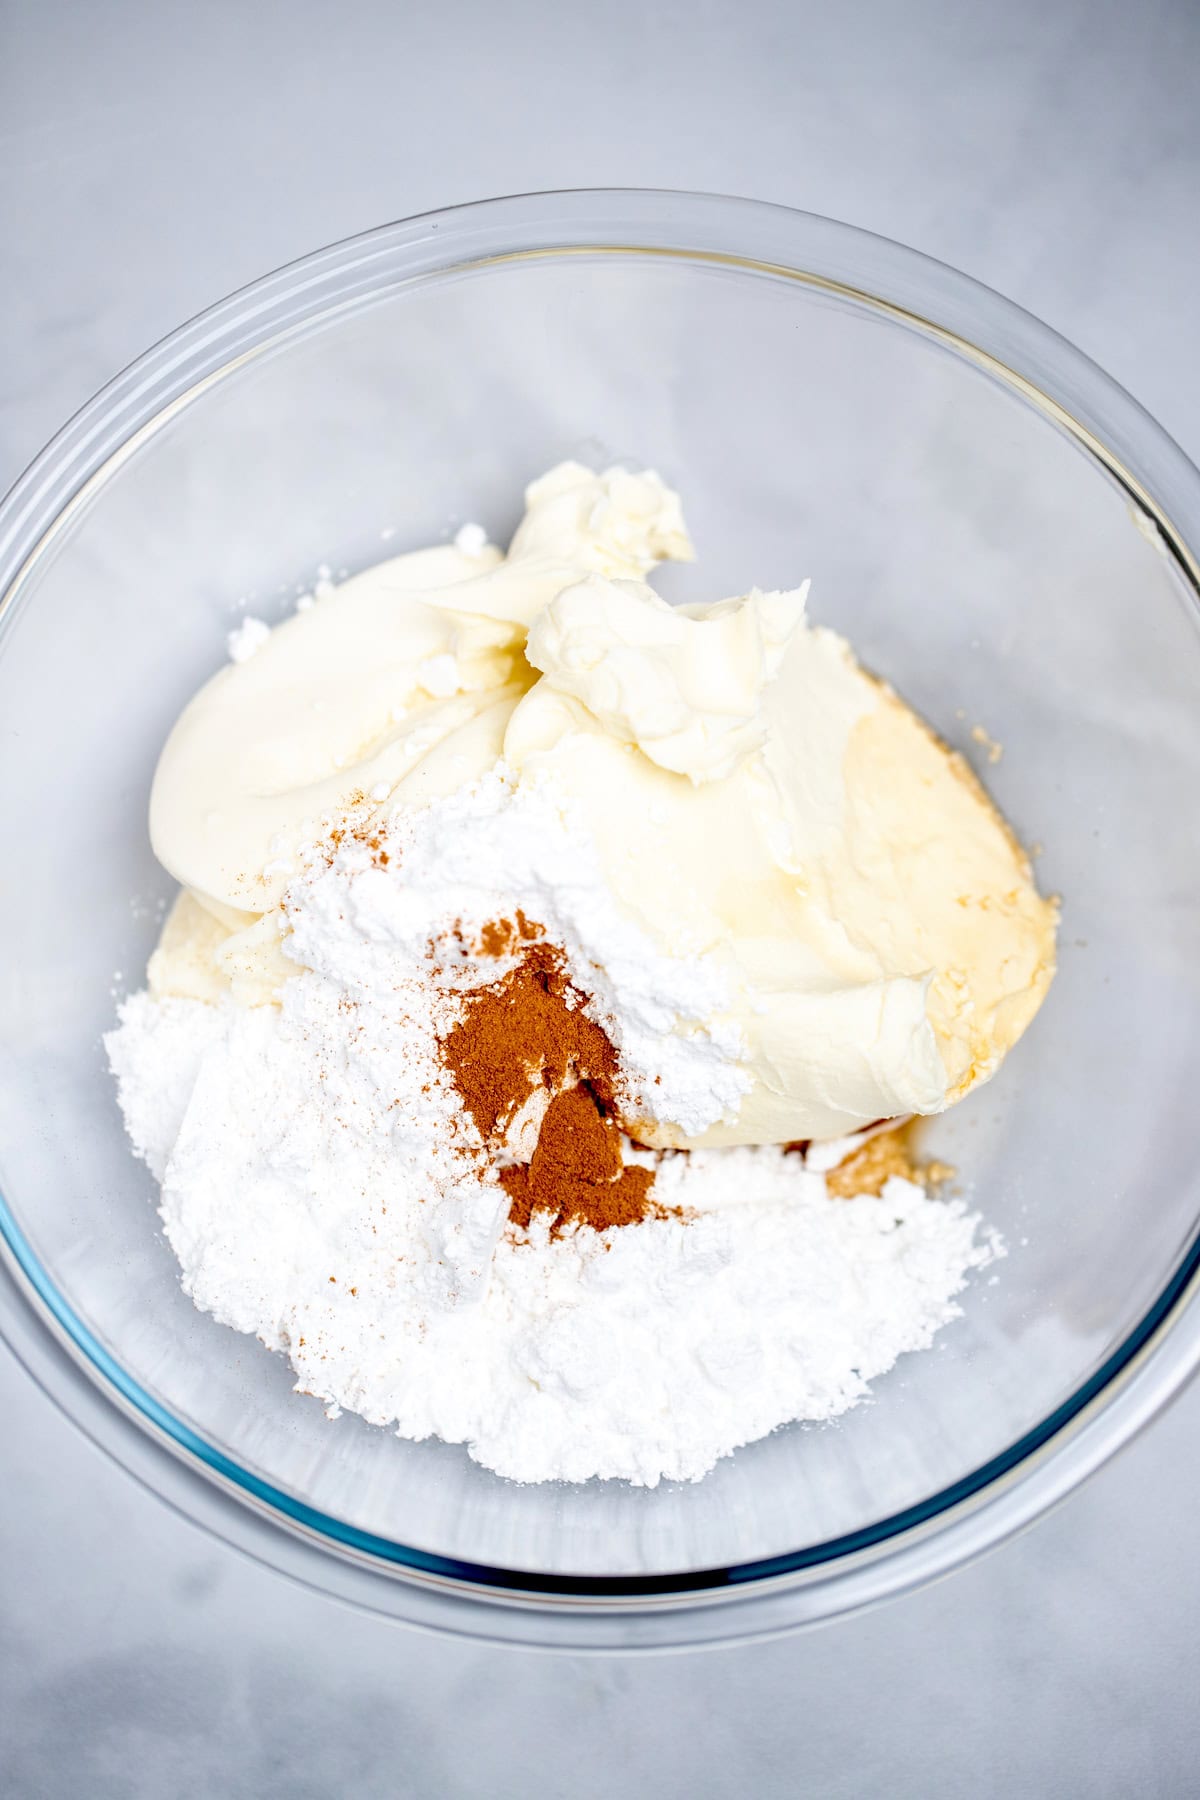 A mixing bowl on a table, full of ricotta cheese, mascarpone cheese, powdered sugar, vanilla extract, and cinnamon.